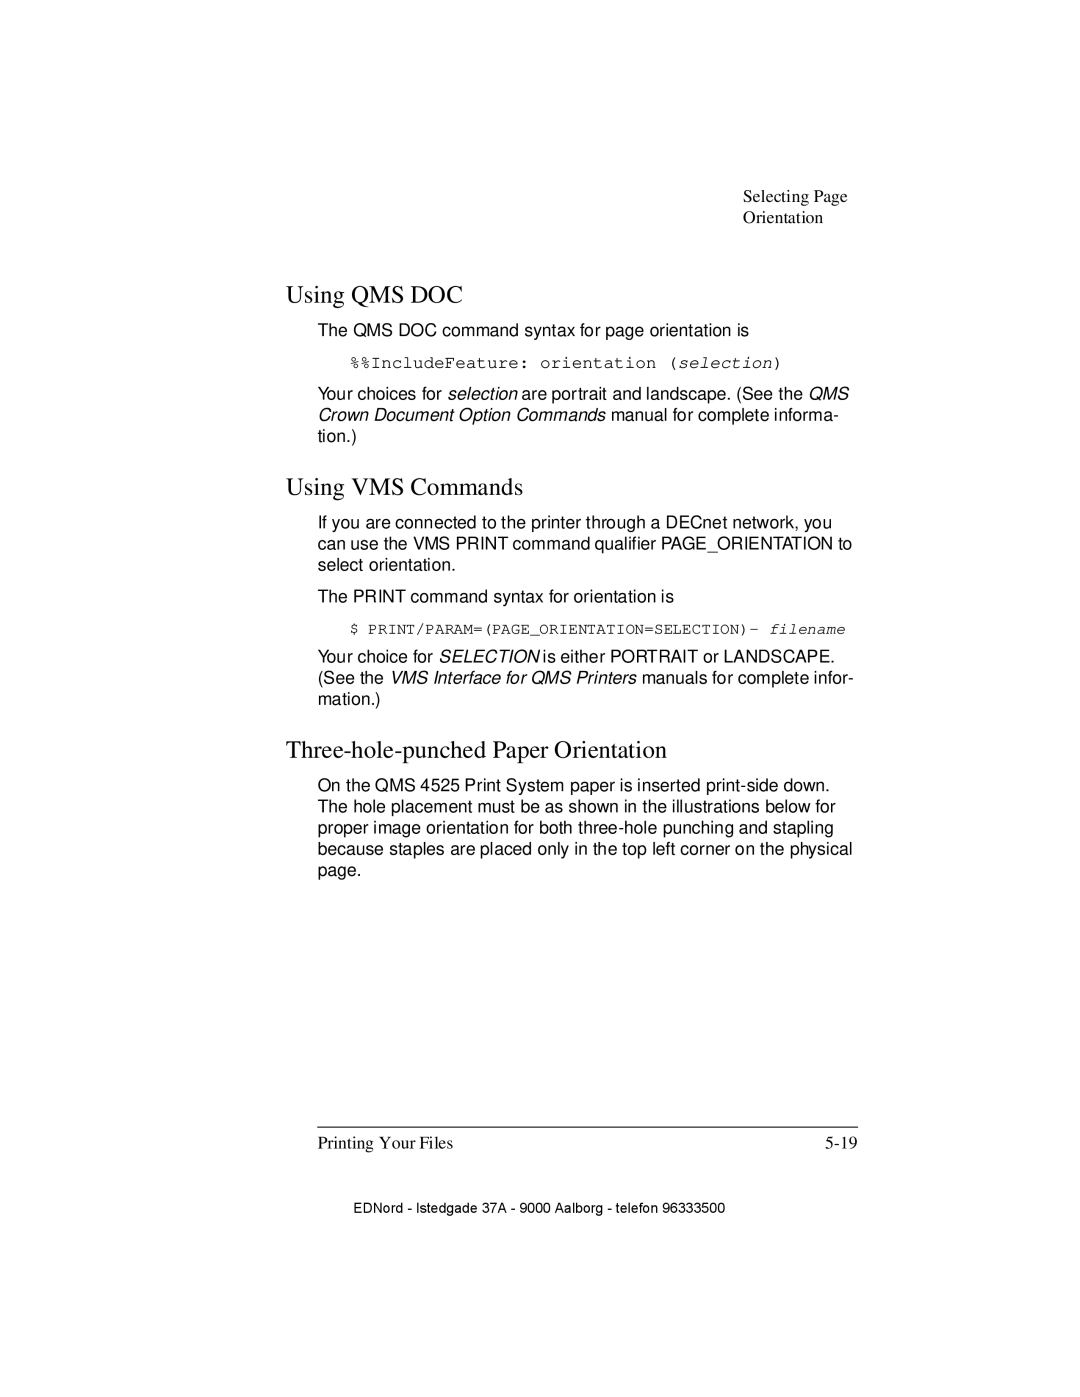 IBM QMS 4525 manual Three-hole-punched Paper Orientation, Using QMS DOC, Using VMS Commands 